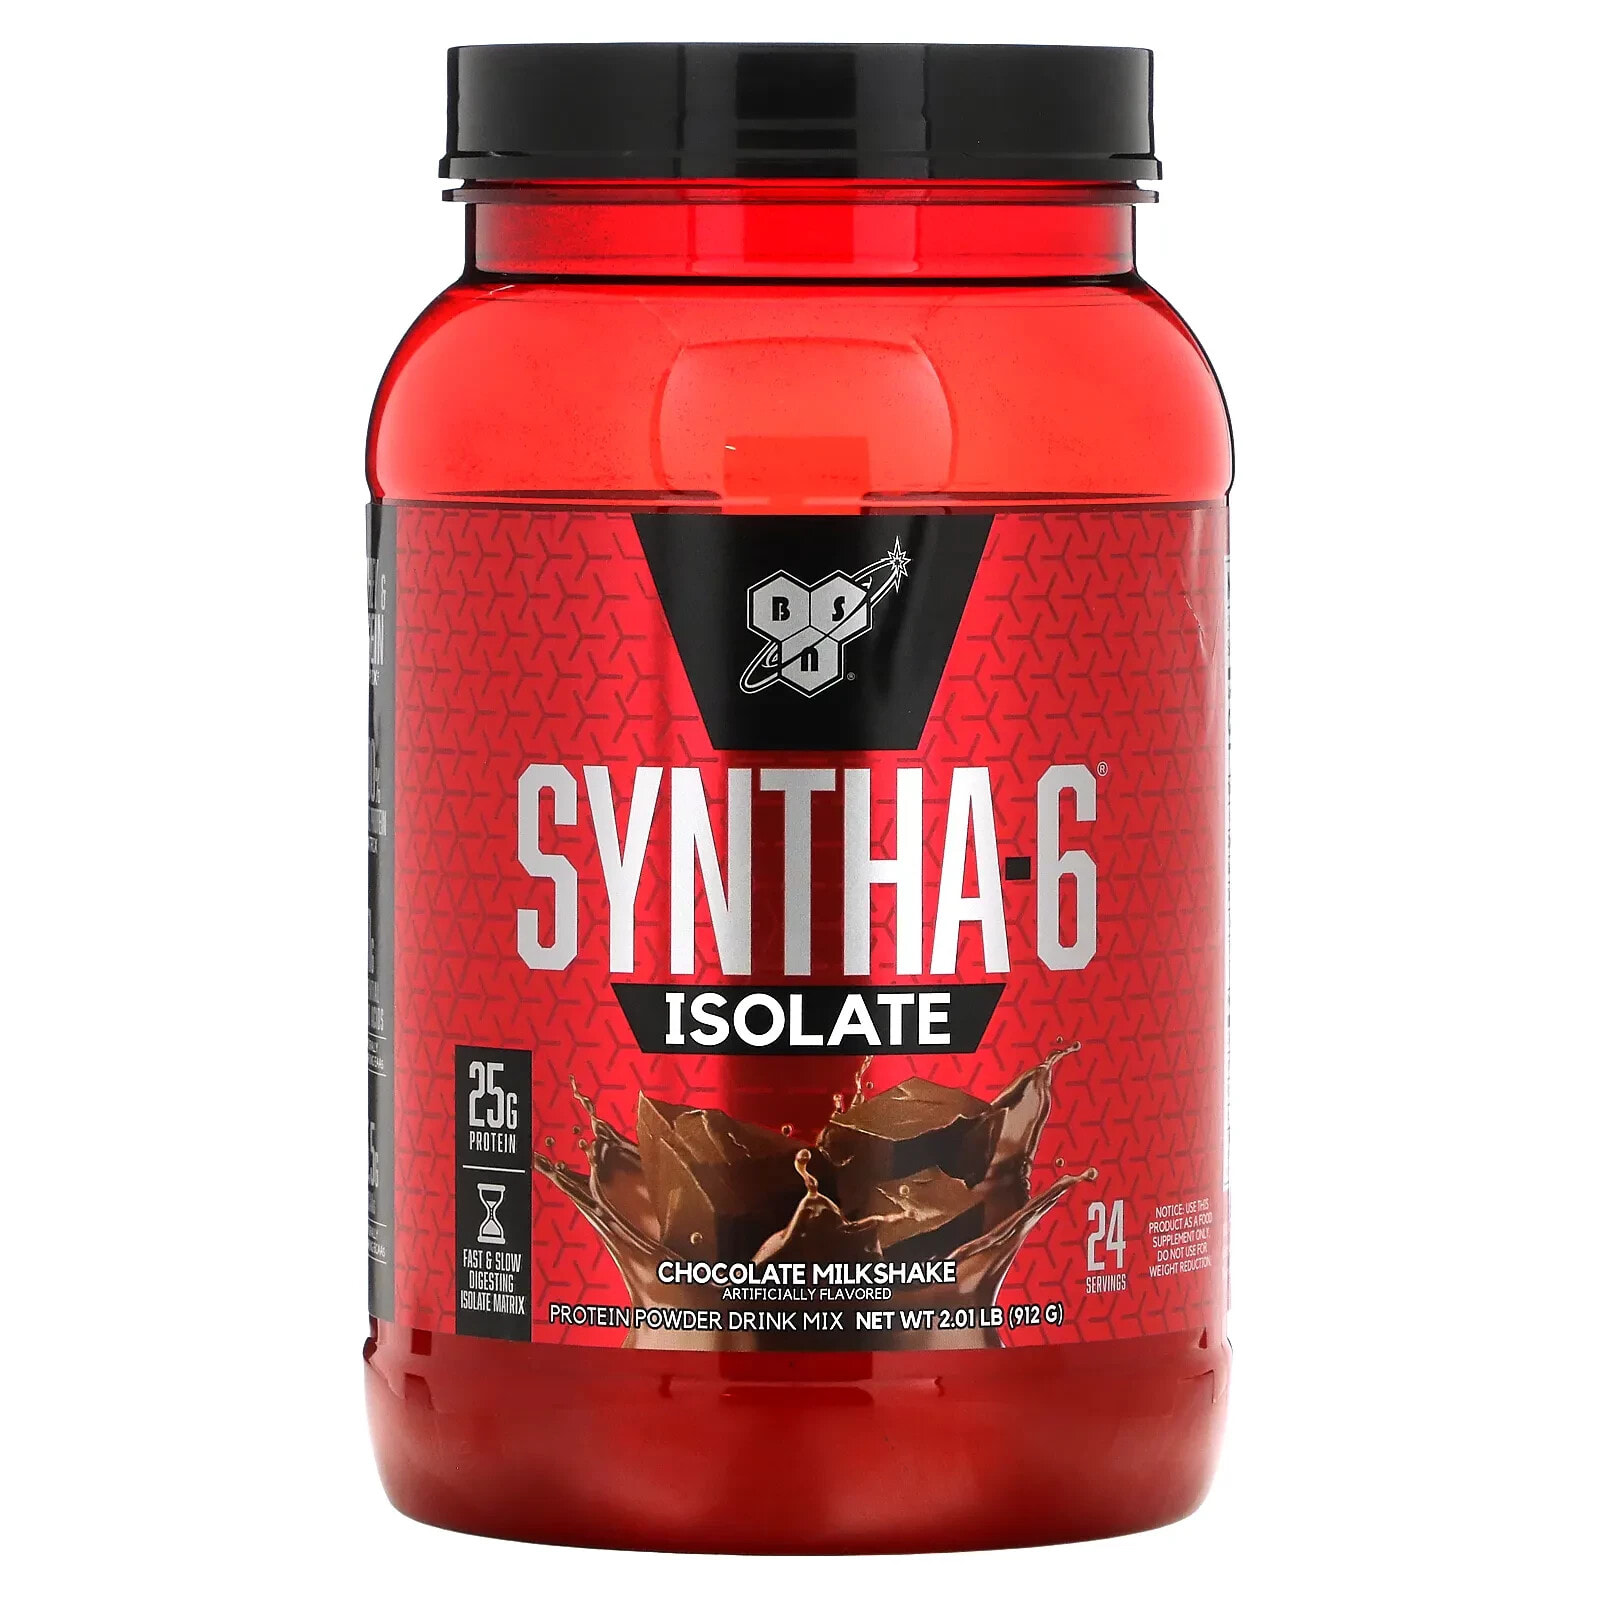 Syntha-6 Isolate, Protein Powder Drink Mix, Chocolate Peanut Butter, 4.02 lb (1.82 kg)